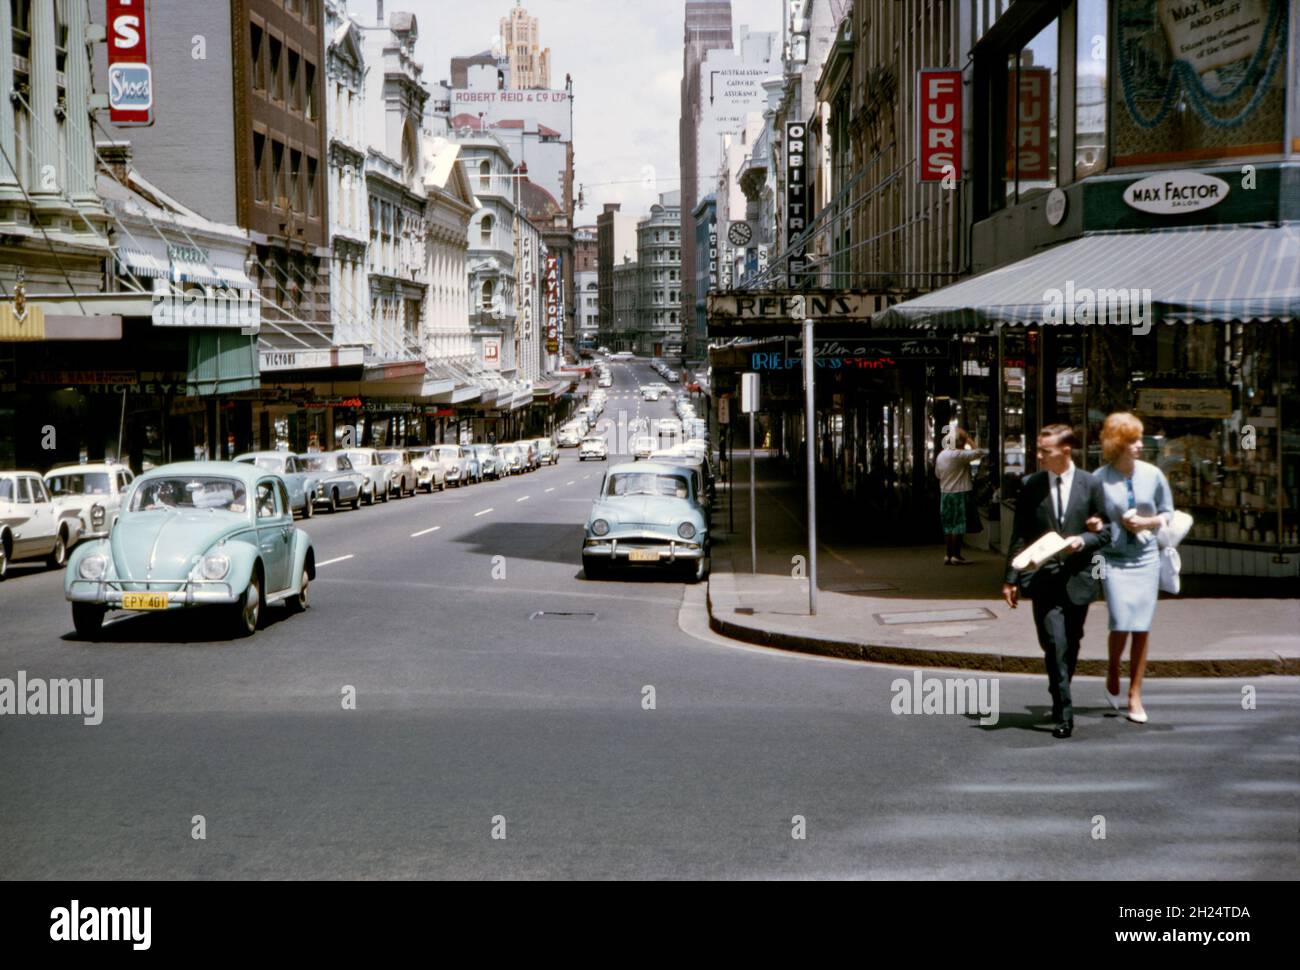 A view looking west down King Street, Sydney, NSW, Australia in 1964 from its intersection with Castlereagh Street. The normally busy street seems very quiet so it could well be a Sunday. The area is much changed and all the shops on the near right are now gone, replaced by the tower and shopping complex of the MLC Centre. King Street is a street in the city centre of Sydney. This image is from an old amateur Kodak colour transparency – a vintage 1960s photograph. Stock Photo